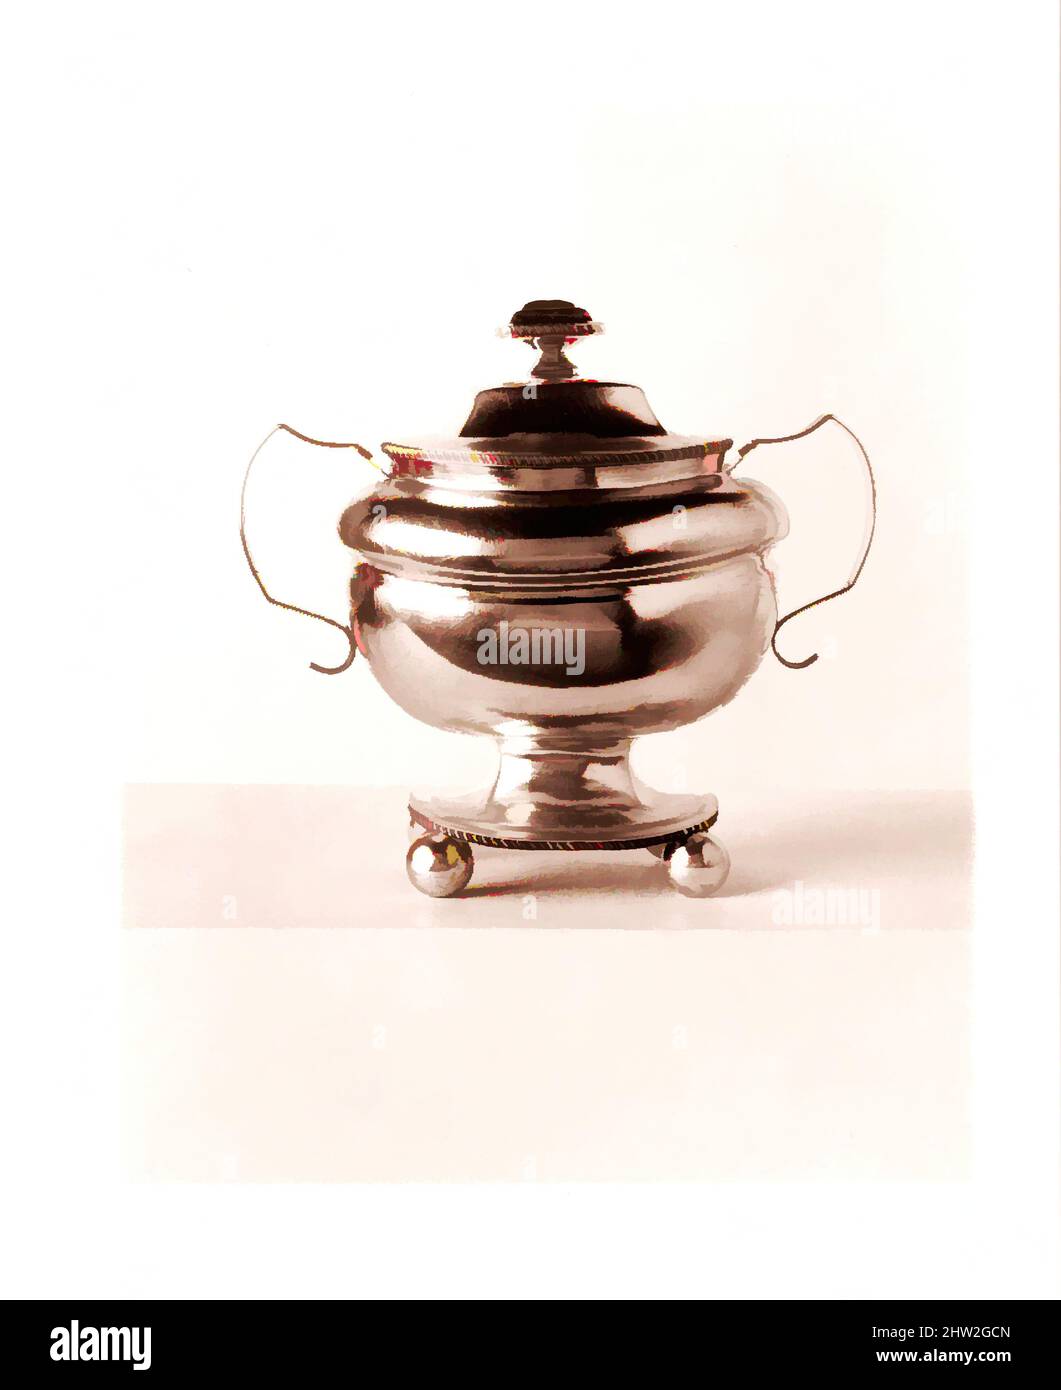 art inspired by sugar bowl ca 1815 made in new york new york united states american silver overall 7 34 x 8 38 x 5 18 in 197 x 213 x 13 cm 15 oz 10 dwt 482 g silver william b heyer active ca 180722 classic works modernized by artotop with a splash of modernity shapes color and value eye catching visual impact on art emotions through freedom of artworks in a contemporary way a timeless message pursuing a wildly creative new direction artists turning to the digital medium and creating the artotop nft 2HW2GCN